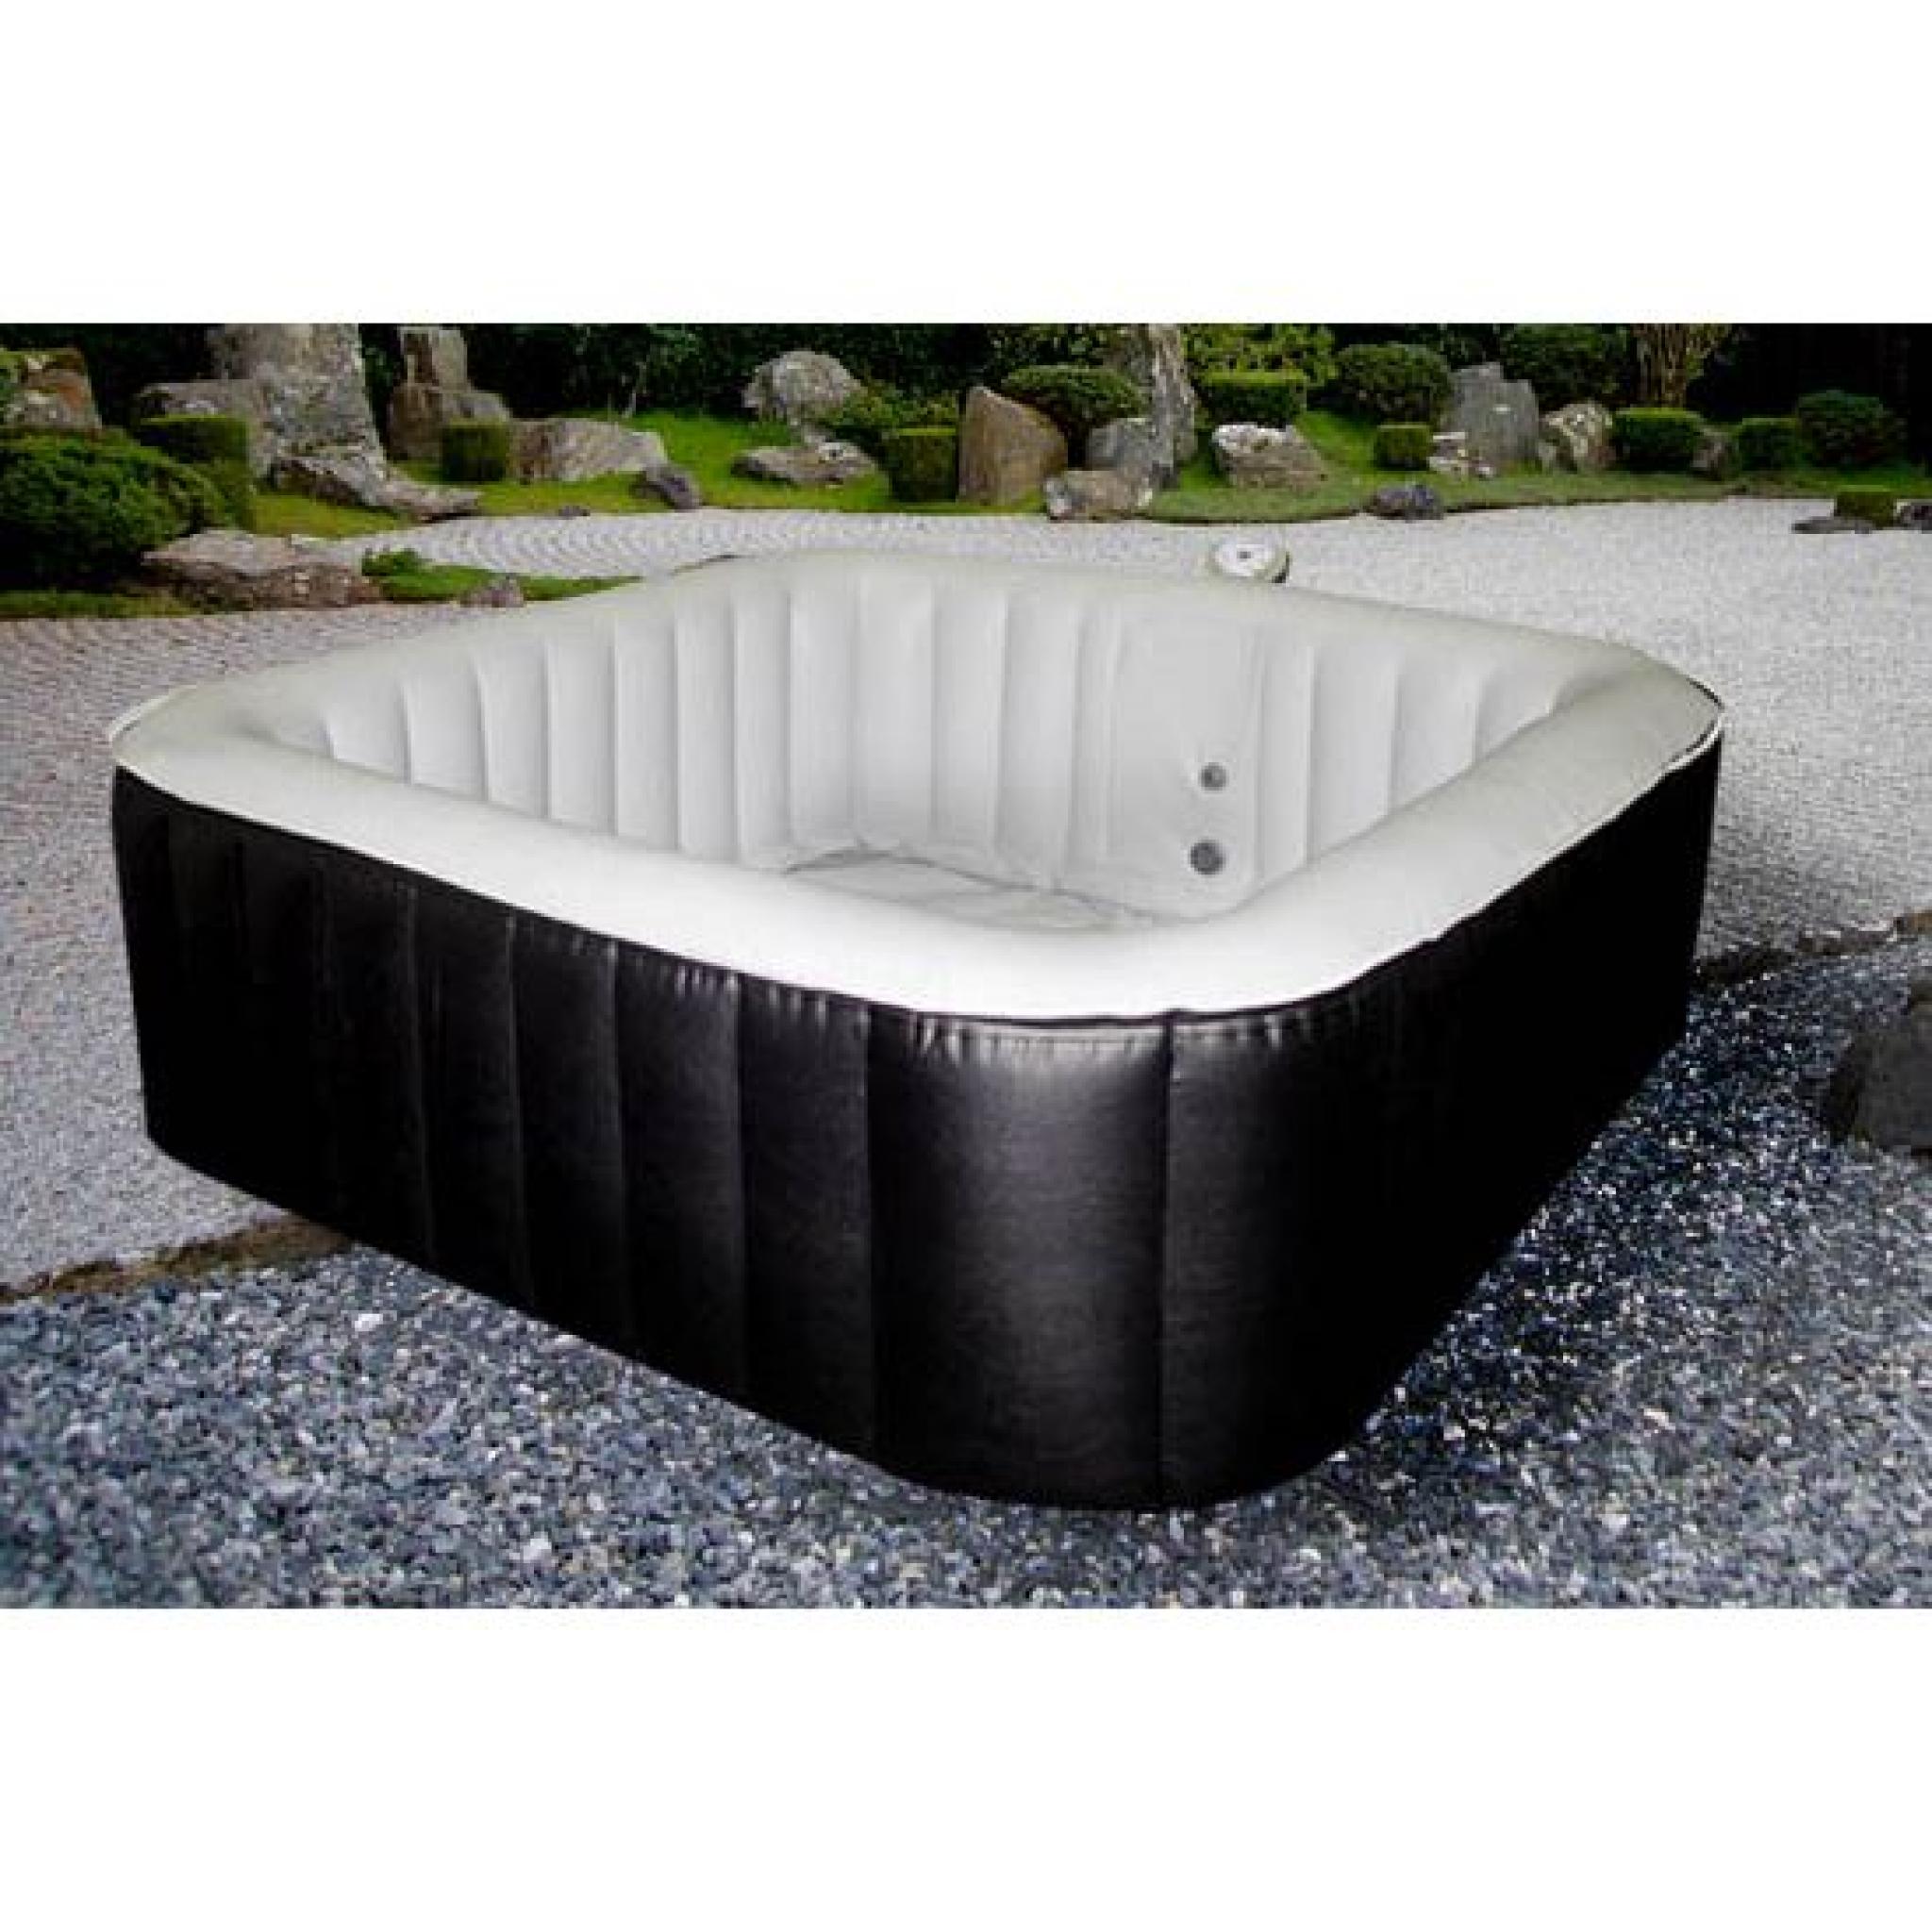 Spa Gonflable Carre 185x185 SPARK 8 personnes